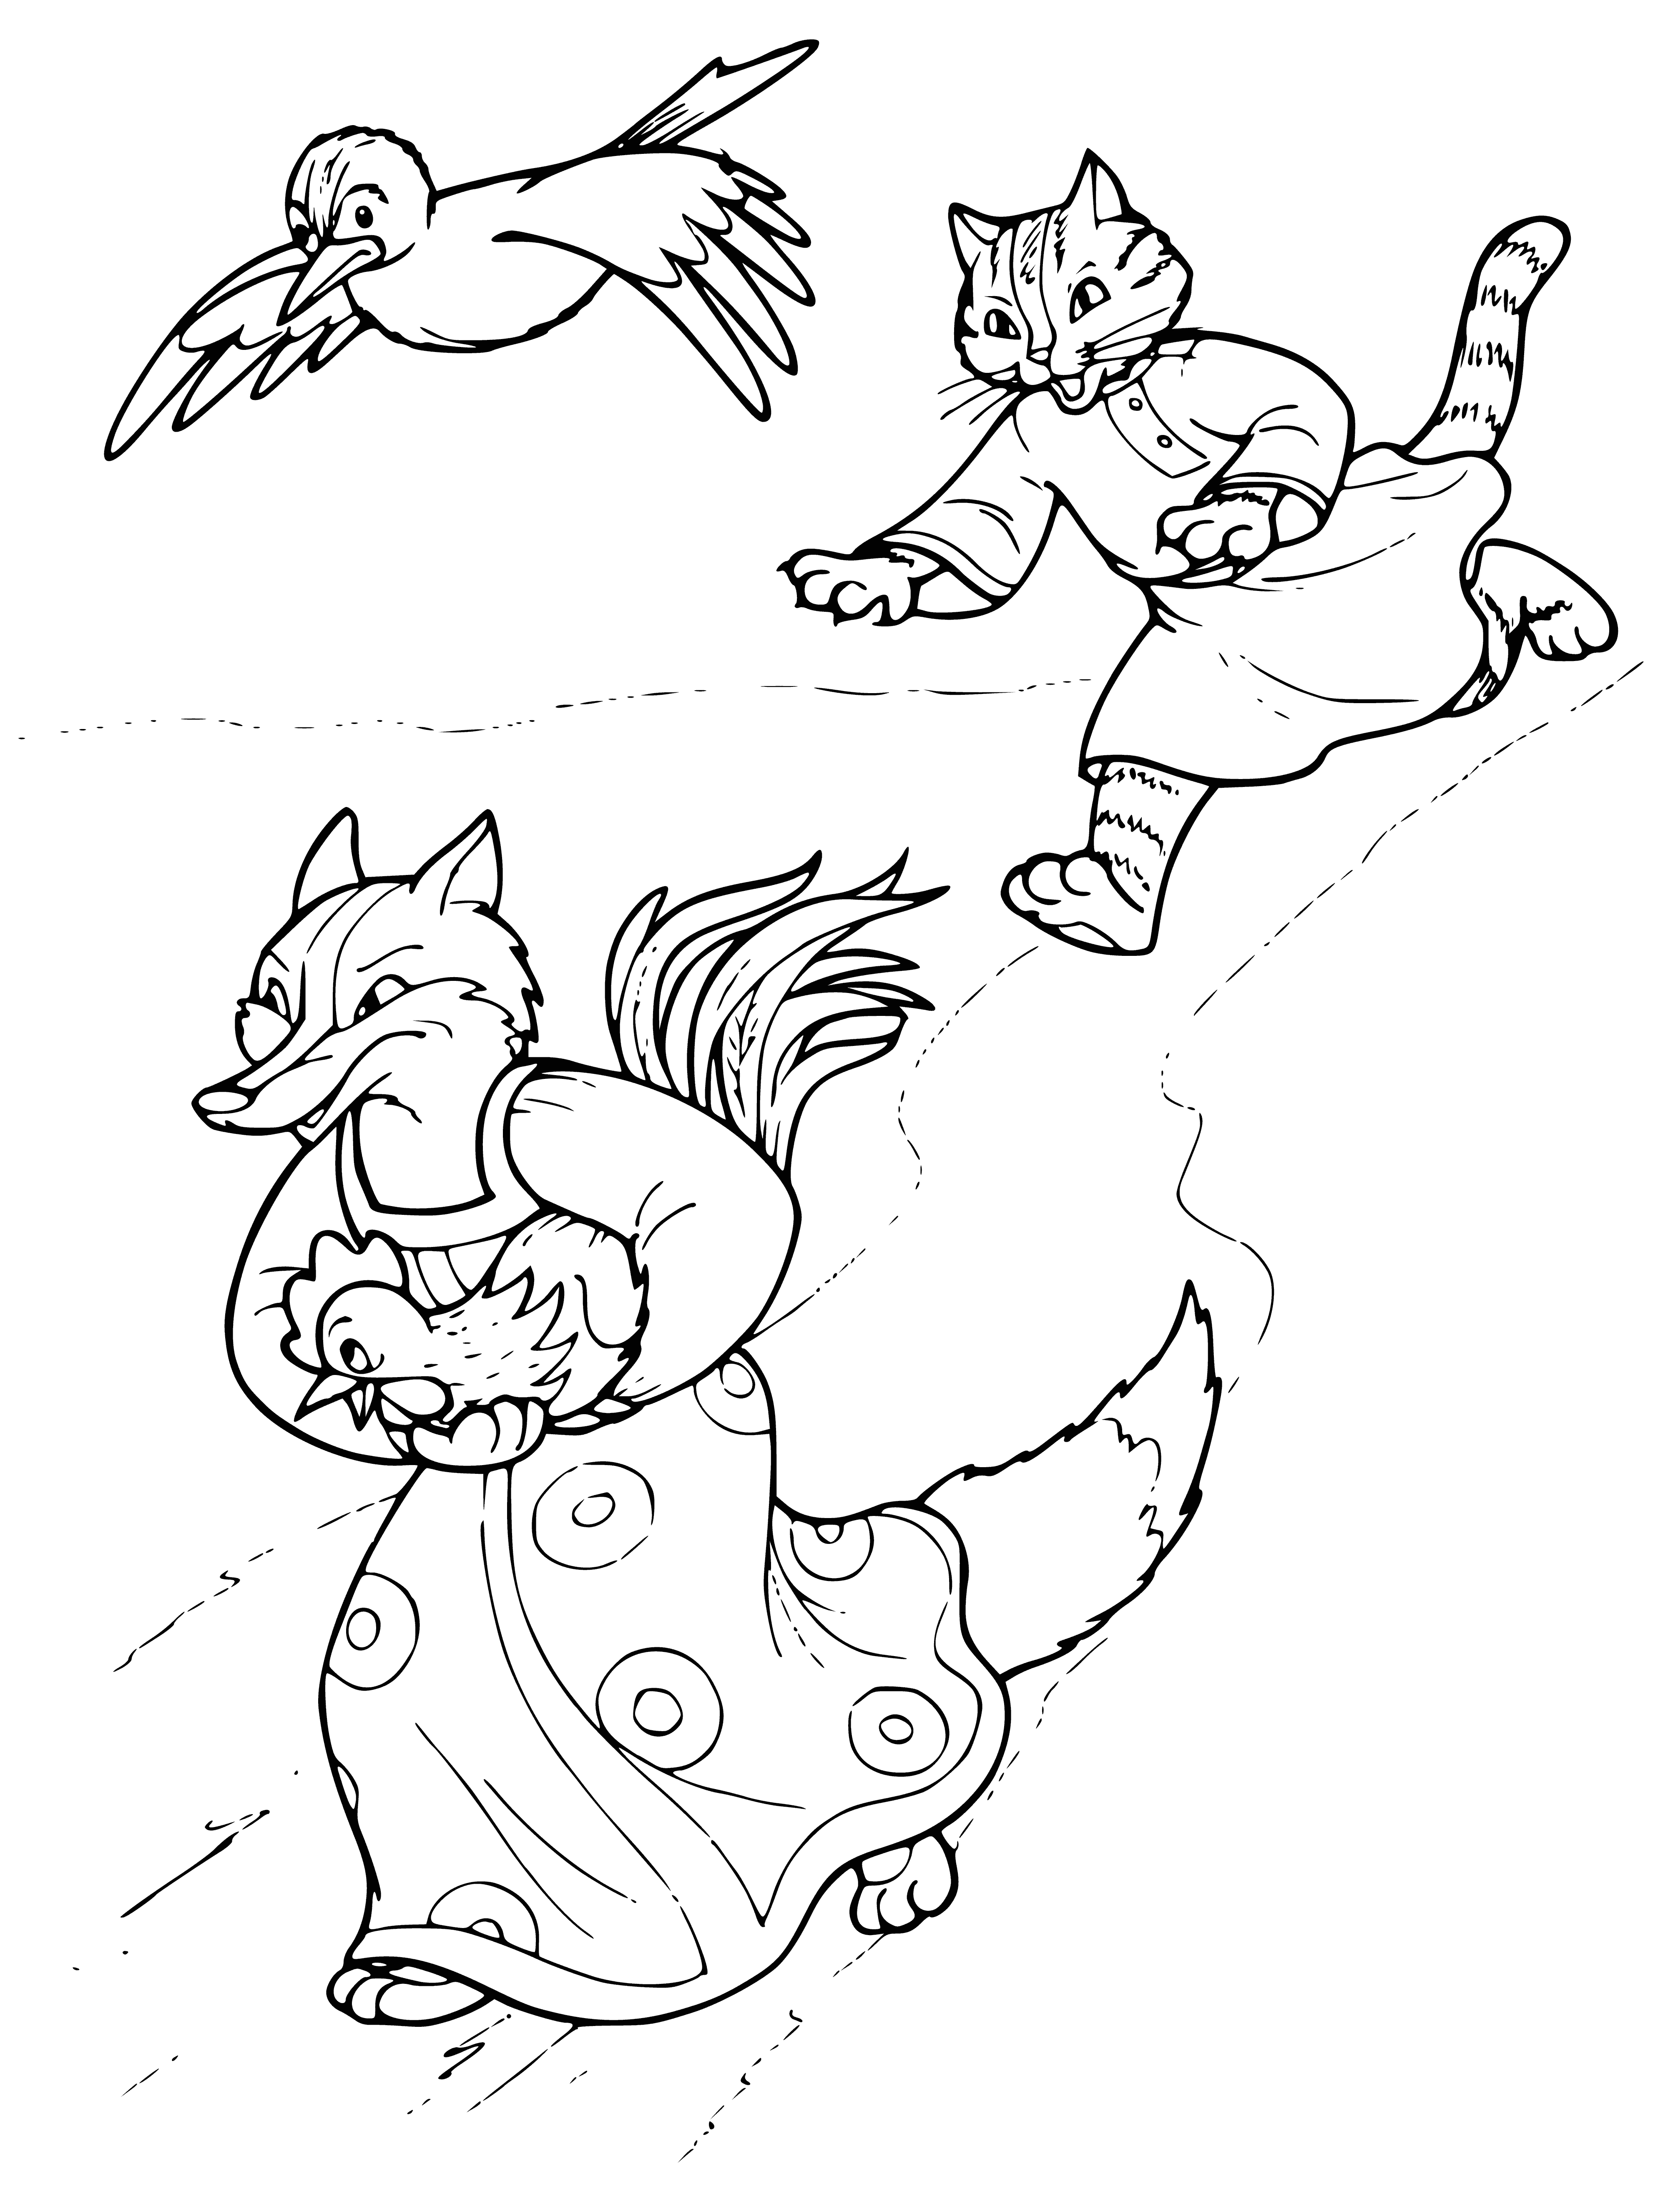 coloring page: Group of people running from huge, furry creature in a forest; creature gaining and about to catch them.